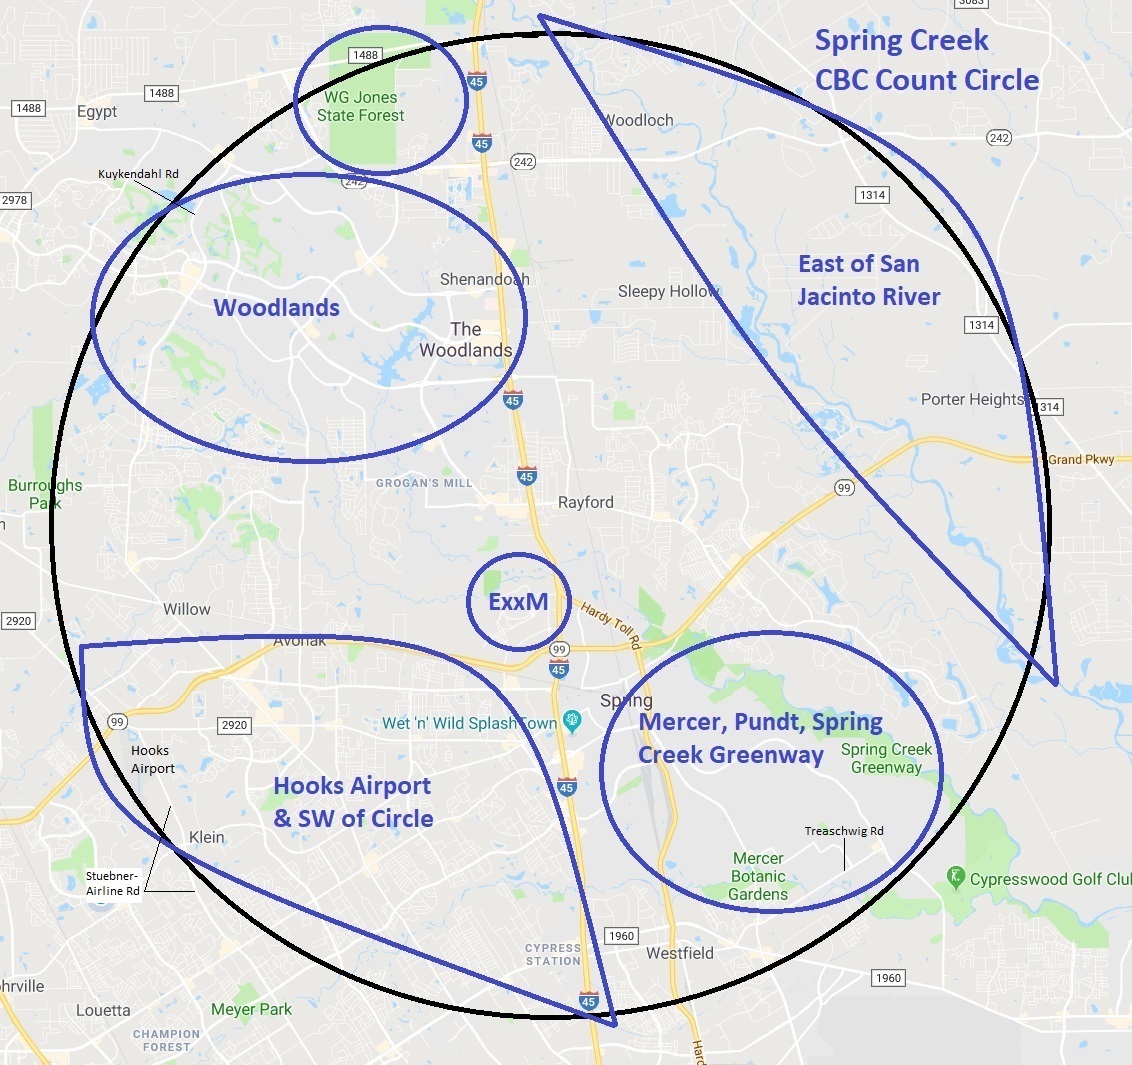 OCT Spring Creek CBC Count Circle - 2018 google map with sections 2 